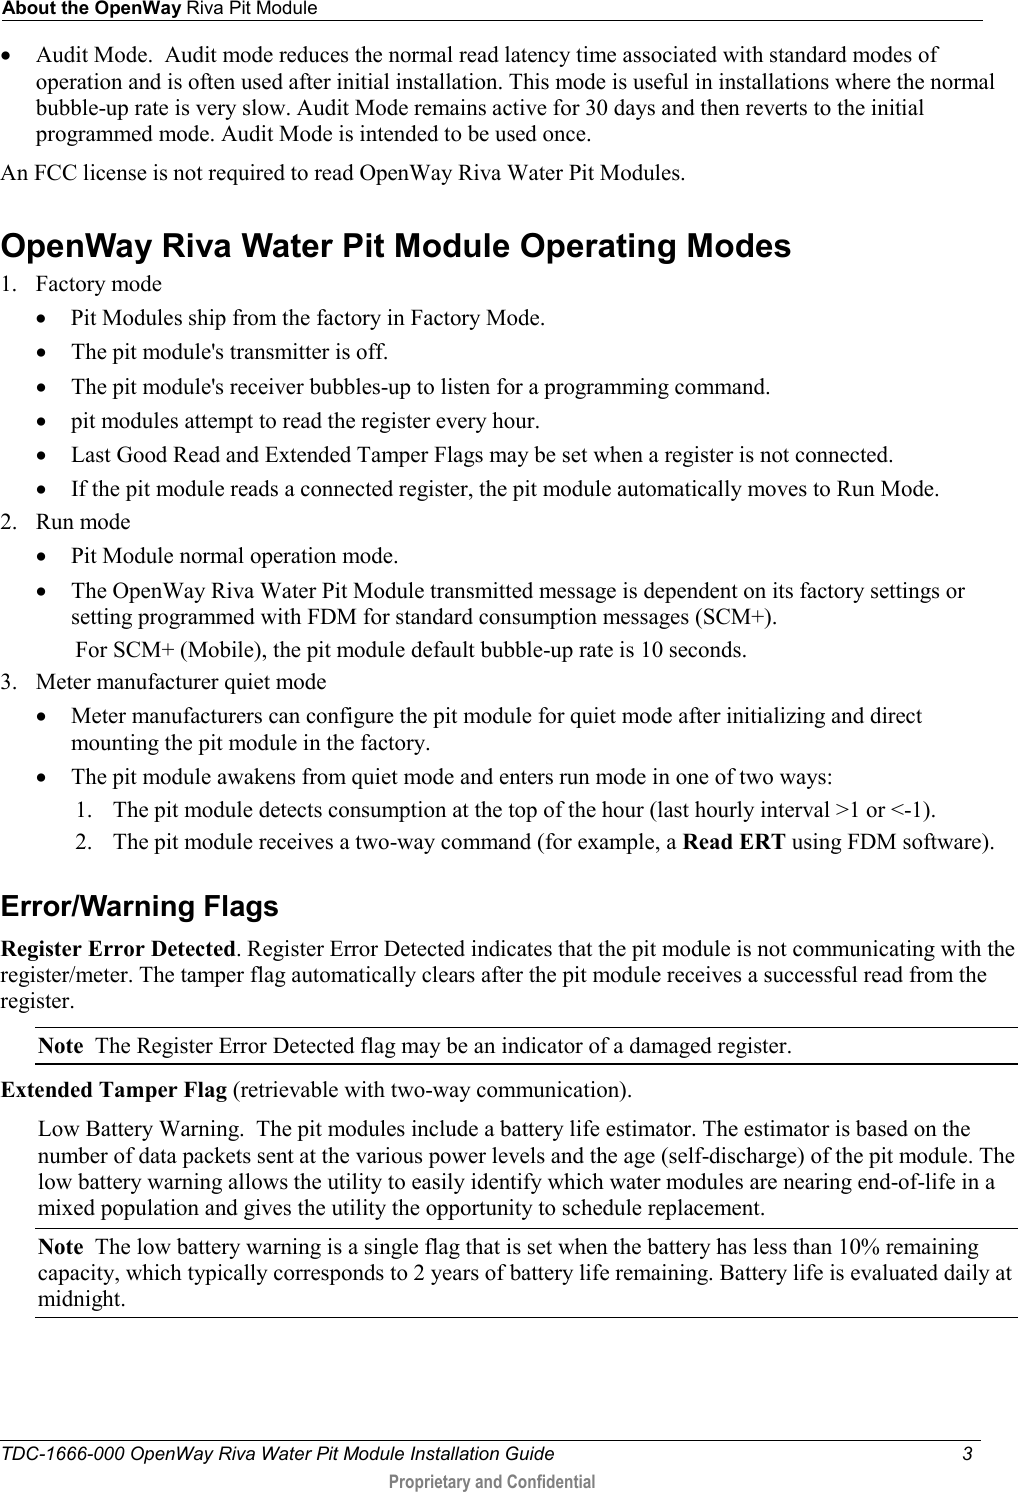 About the OpenWay Riva Pit Module  TDC-1666-000 OpenWay Riva Water Pit Module Installation Guide  3   Proprietary and Confidential  • Audit Mode.  Audit mode reduces the normal read latency time associated with standard modes of operation and is often used after initial installation. This mode is useful in installations where the normal bubble-up rate is very slow. Audit Mode remains active for 30 days and then reverts to the initial programmed mode. Audit Mode is intended to be used once. An FCC license is not required to read OpenWay Riva Water Pit Modules.   OpenWay Riva Water Pit Module Operating Modes 1. Factory mode • Pit Modules ship from the factory in Factory Mode. • The pit module&apos;s transmitter is off. • The pit module&apos;s receiver bubbles-up to listen for a programming command. • pit modules attempt to read the register every hour. • Last Good Read and Extended Tamper Flags may be set when a register is not connected. • If the pit module reads a connected register, the pit module automatically moves to Run Mode. 2. Run mode • Pit Module normal operation mode. • The OpenWay Riva Water Pit Module transmitted message is dependent on its factory settings or setting programmed with FDM for standard consumption messages (SCM+). For SCM+ (Mobile), the pit module default bubble-up rate is 10 seconds. 3. Meter manufacturer quiet mode • Meter manufacturers can configure the pit module for quiet mode after initializing and direct mounting the pit module in the factory.  • The pit module awakens from quiet mode and enters run mode in one of two ways: 1. The pit module detects consumption at the top of the hour (last hourly interval &gt;1 or &lt;-1). 2. The pit module receives a two-way command (for example, a Read ERT using FDM software).  Error/Warning Flags Register Error Detected. Register Error Detected indicates that the pit module is not communicating with the register/meter. The tamper flag automatically clears after the pit module receives a successful read from the register. Note  The Register Error Detected flag may be an indicator of a damaged register. Extended Tamper Flag (retrievable with two-way communication).   Low Battery Warning.  The pit modules include a battery life estimator. The estimator is based on the number of data packets sent at the various power levels and the age (self-discharge) of the pit module. The low battery warning allows the utility to easily identify which water modules are nearing end-of-life in a mixed population and gives the utility the opportunity to schedule replacement. Note  The low battery warning is a single flag that is set when the battery has less than 10% remaining capacity, which typically corresponds to 2 years of battery life remaining. Battery life is evaluated daily at midnight. 